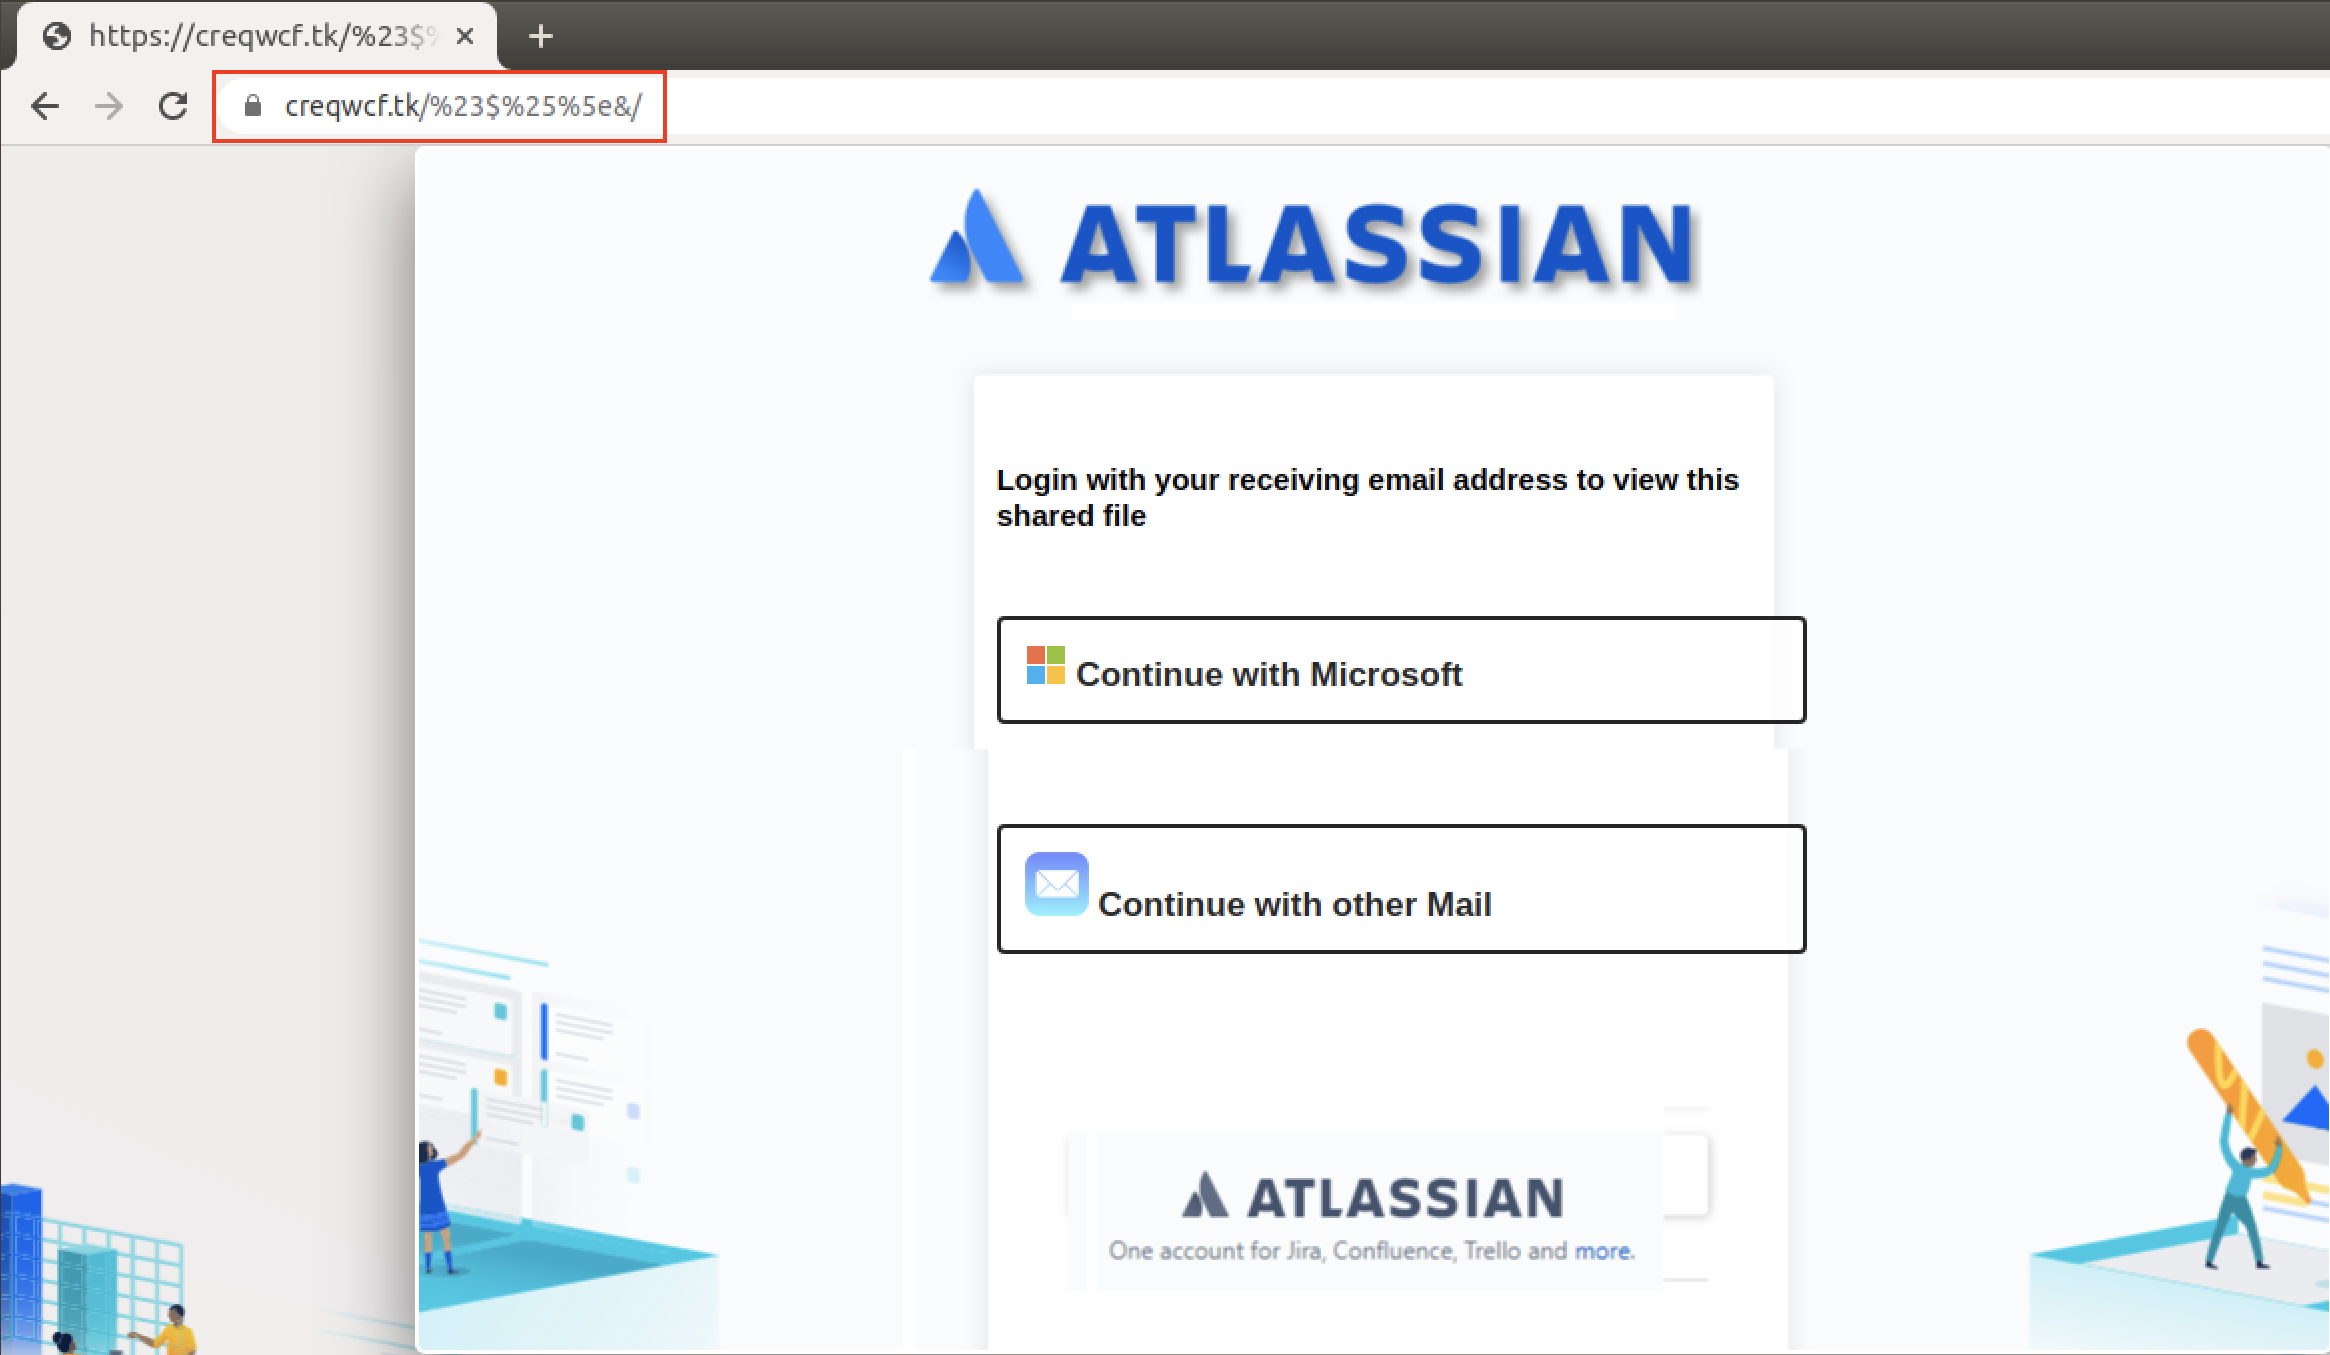 Clicking on the “Access Document” button shown in the figure above took us to a login page with an Atlassian logo, as shown here.